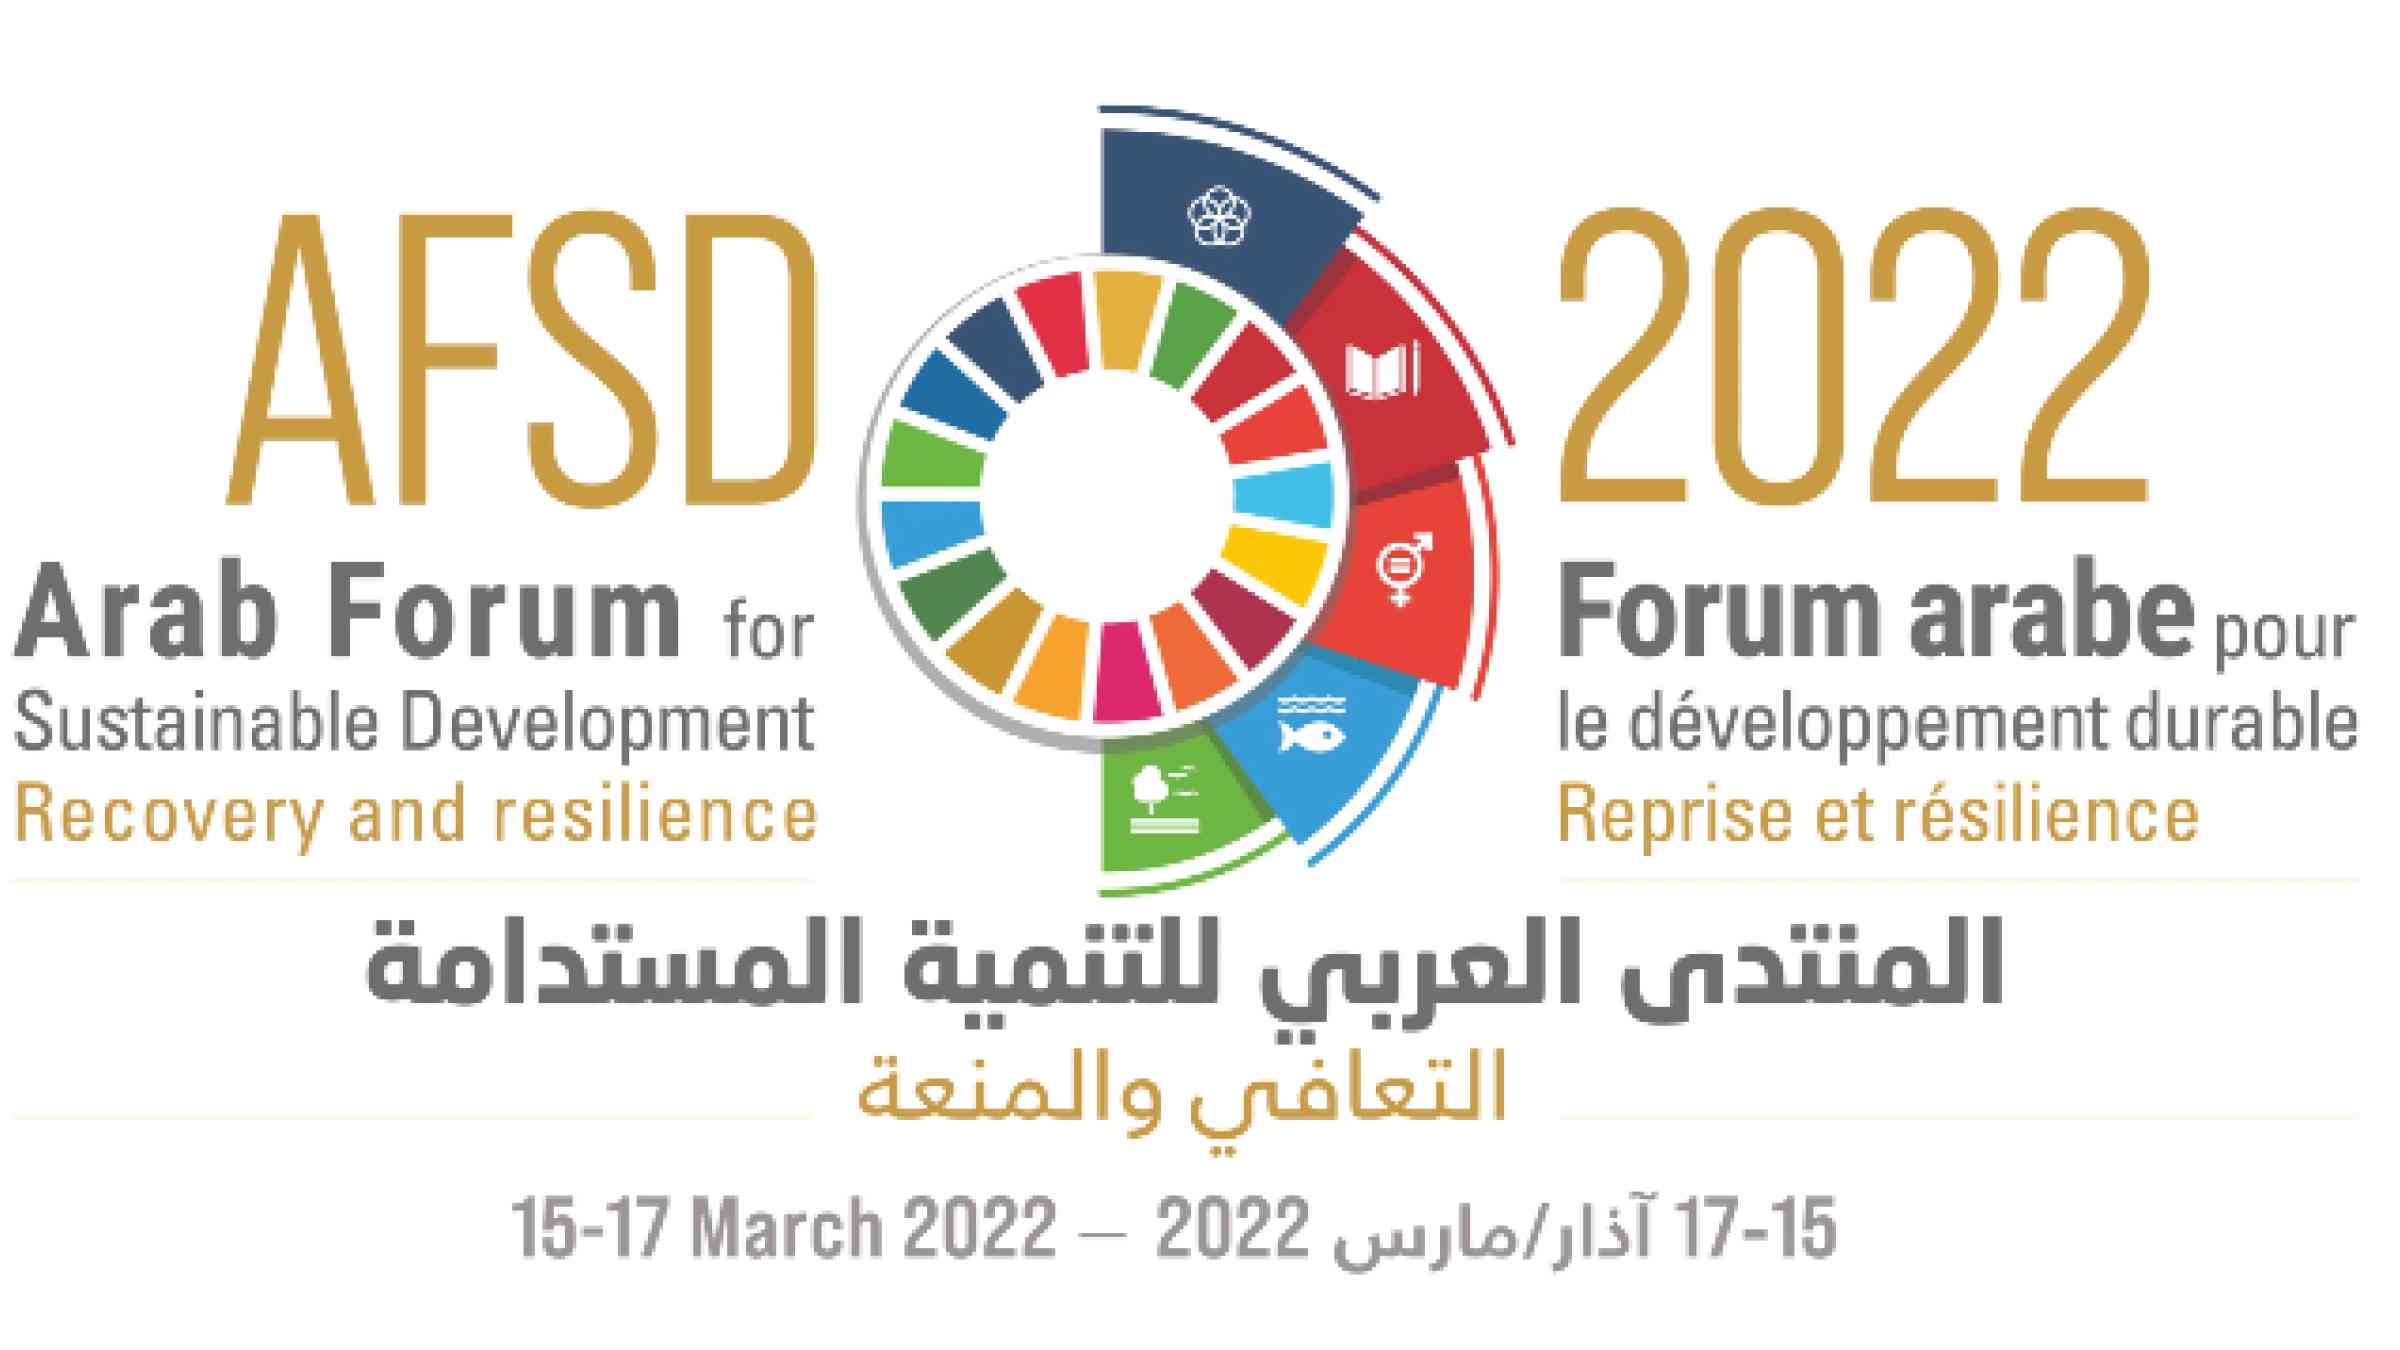 Arab Forum for Sustainable Development Recovery and Resilience 2022